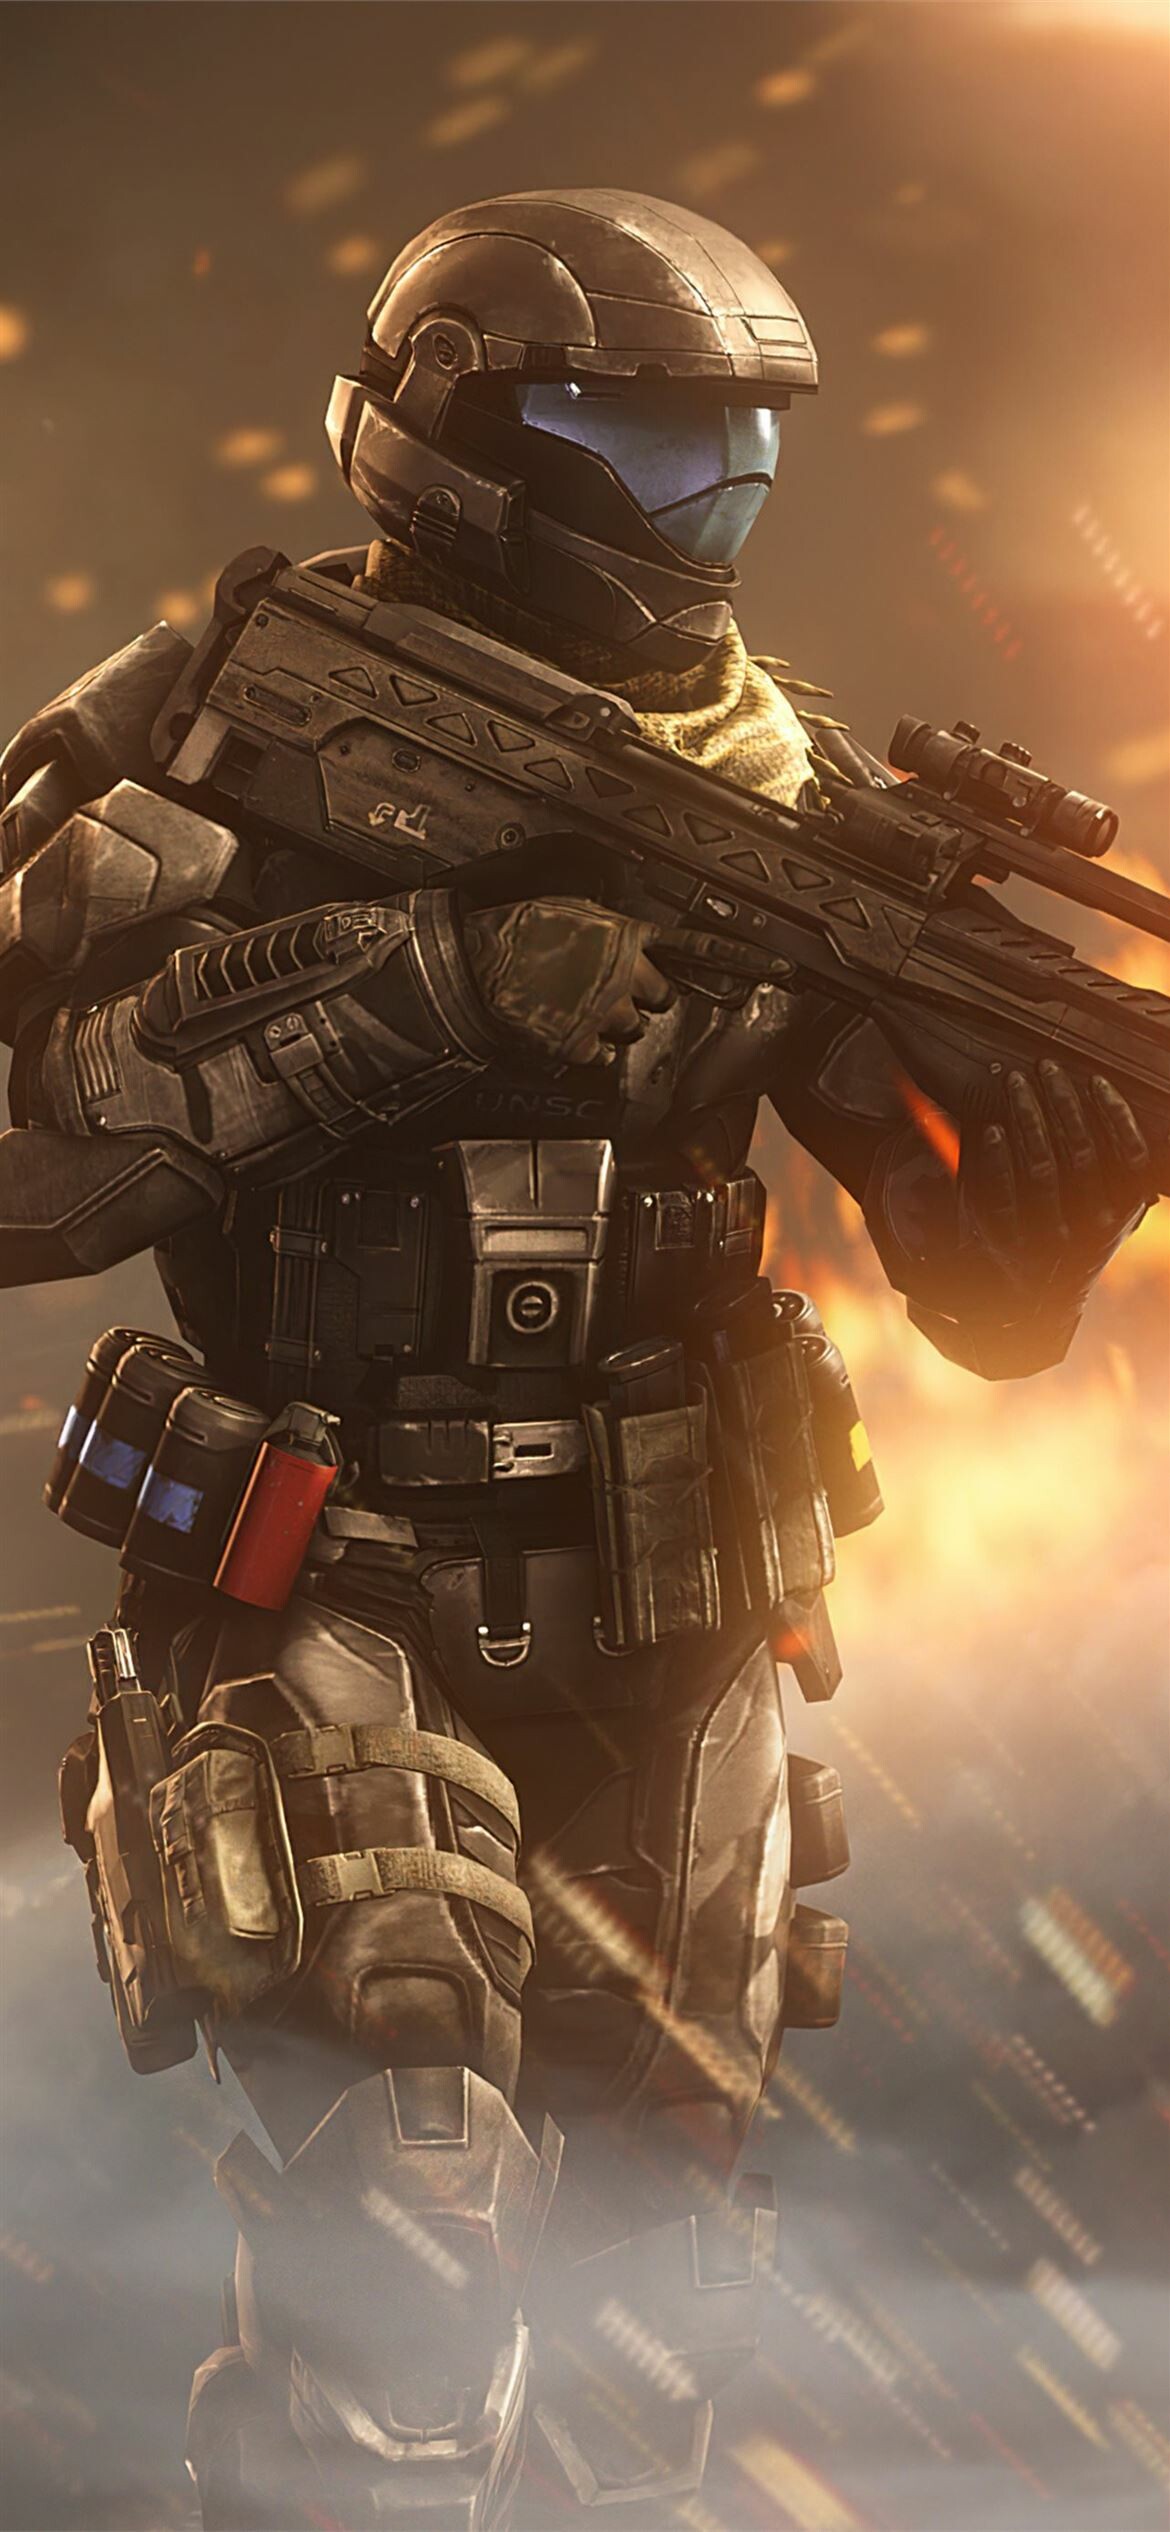 Halo, Best iPhone gaming wallpapers, Action-packed battles, Gaming delight, 1170x2540 HD Phone